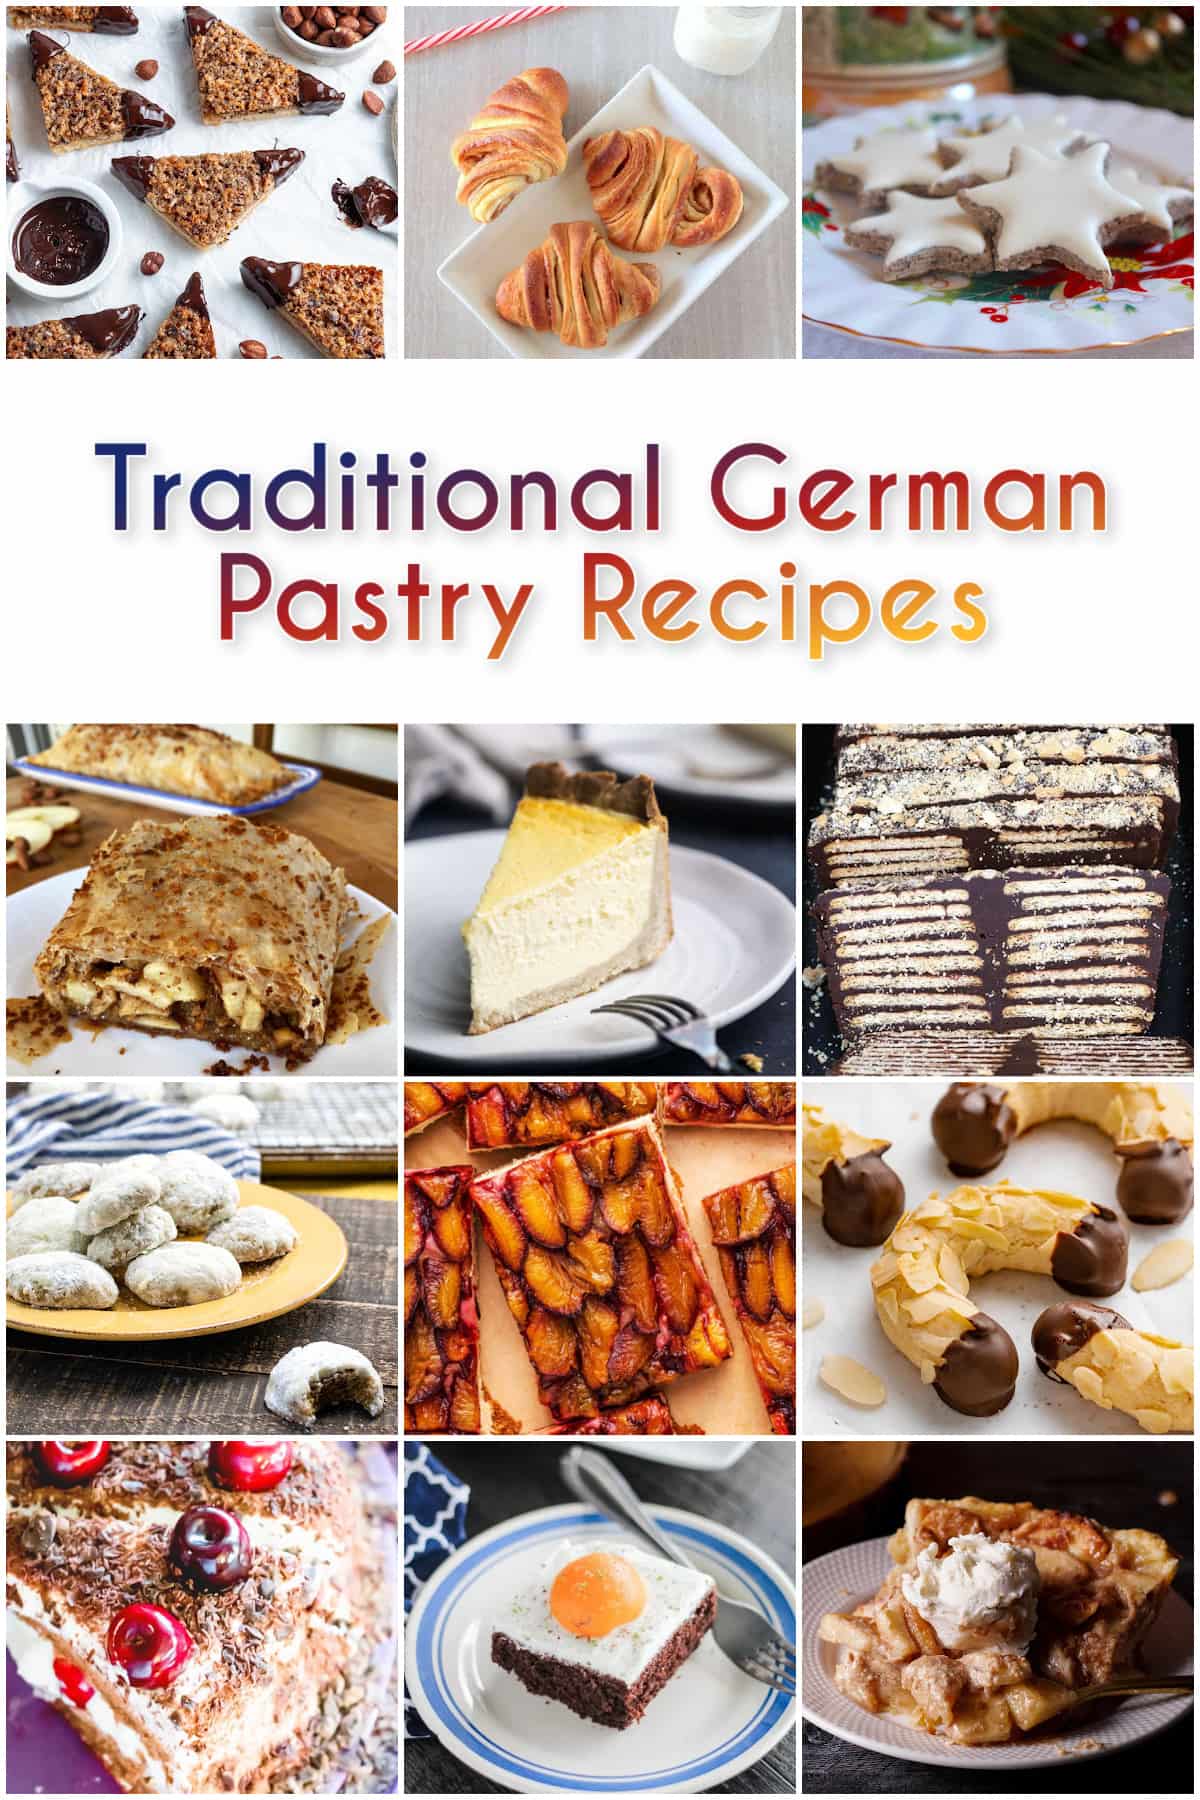 12-panel collage showing images of food and recipes from German Dessert Recipes roundup. Pin text reads: Traditional German Pastry Recipes.